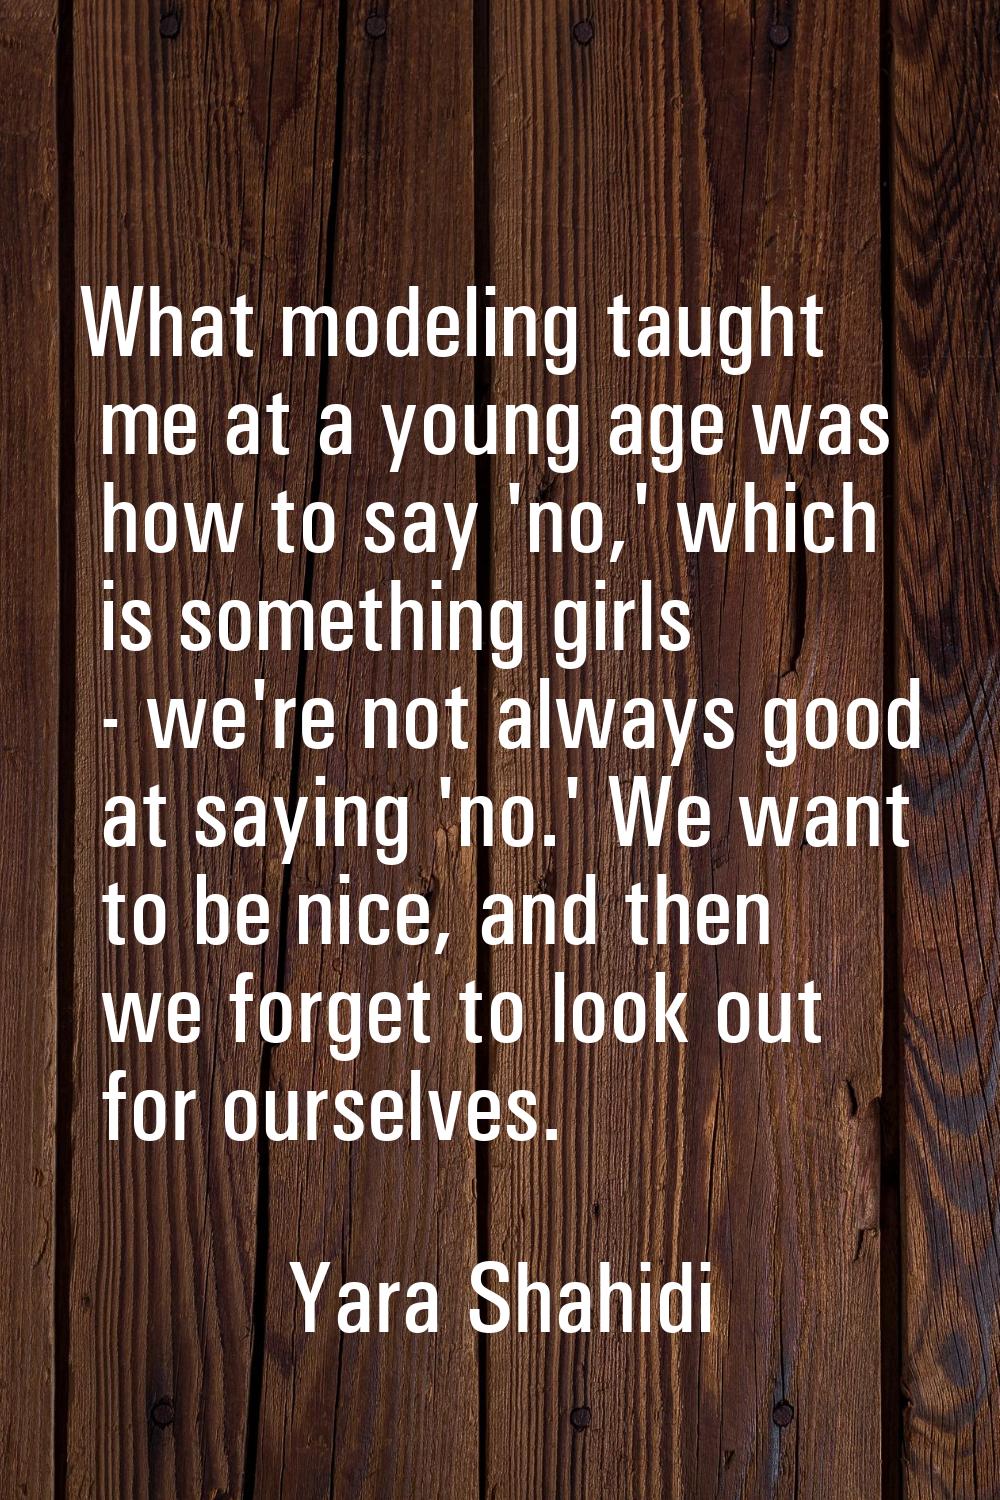 What modeling taught me at a young age was how to say 'no,' which is something girls - we're not al